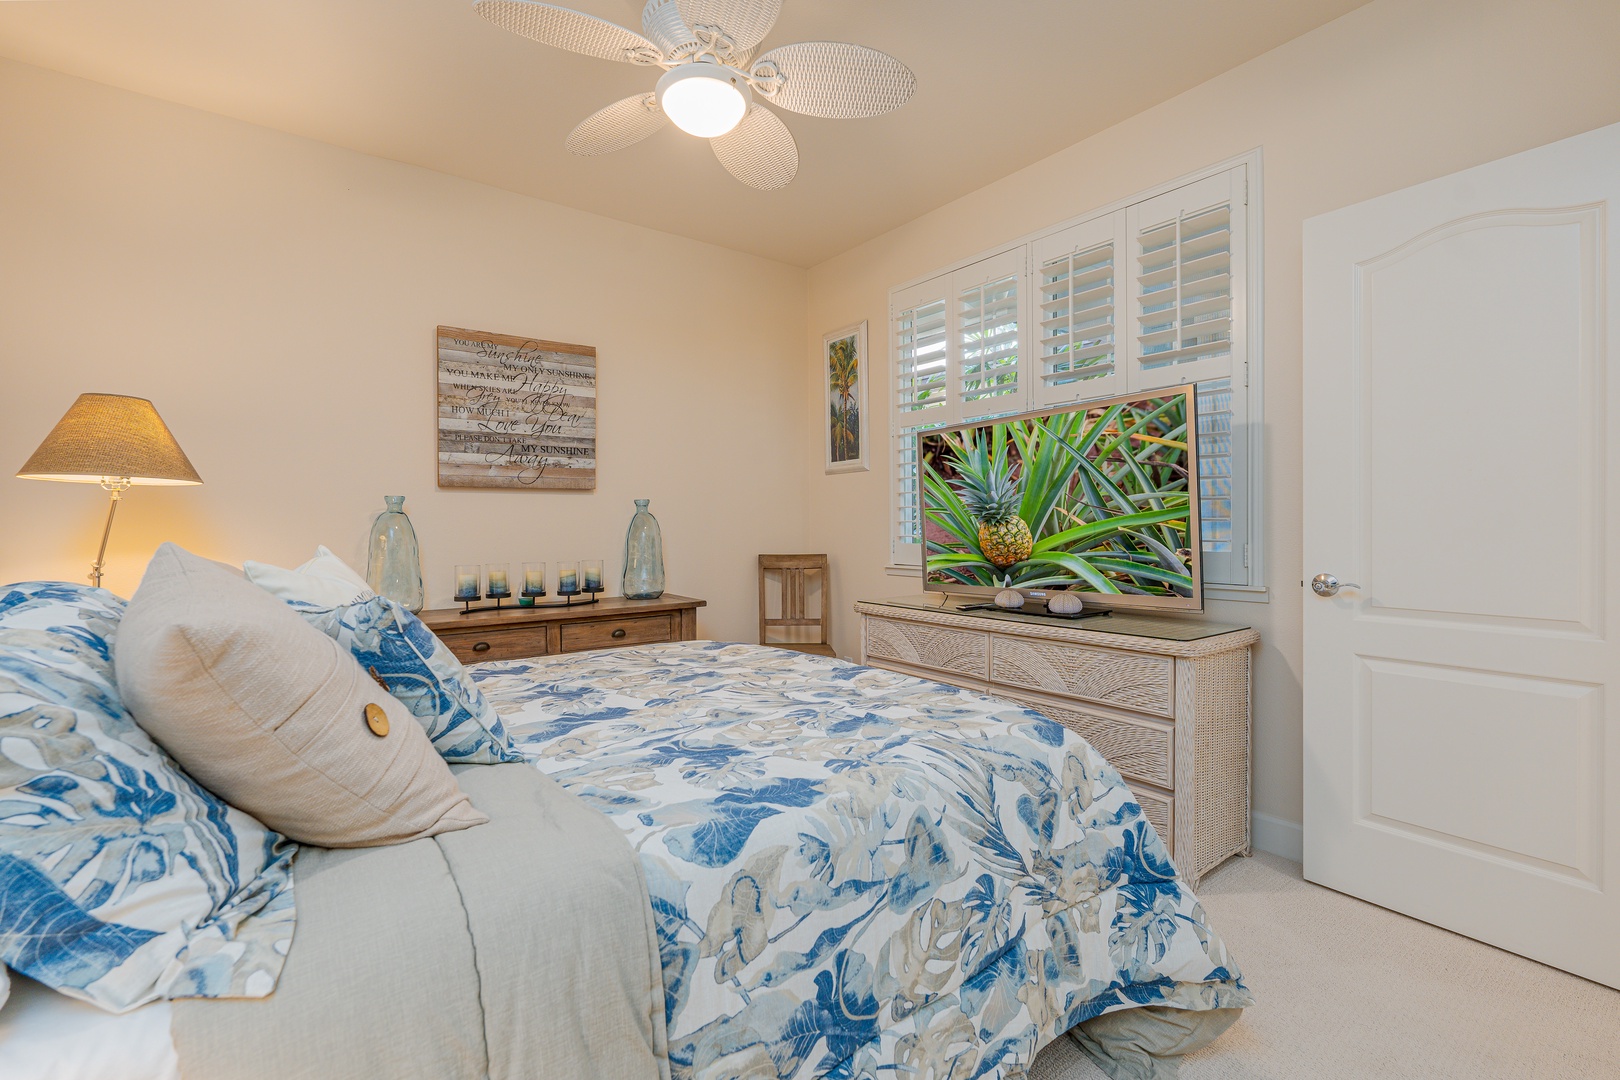 Kapolei Vacation Rentals, Ko Olina Kai 1097C - Cozy guest bedroom with an airy ambiance.